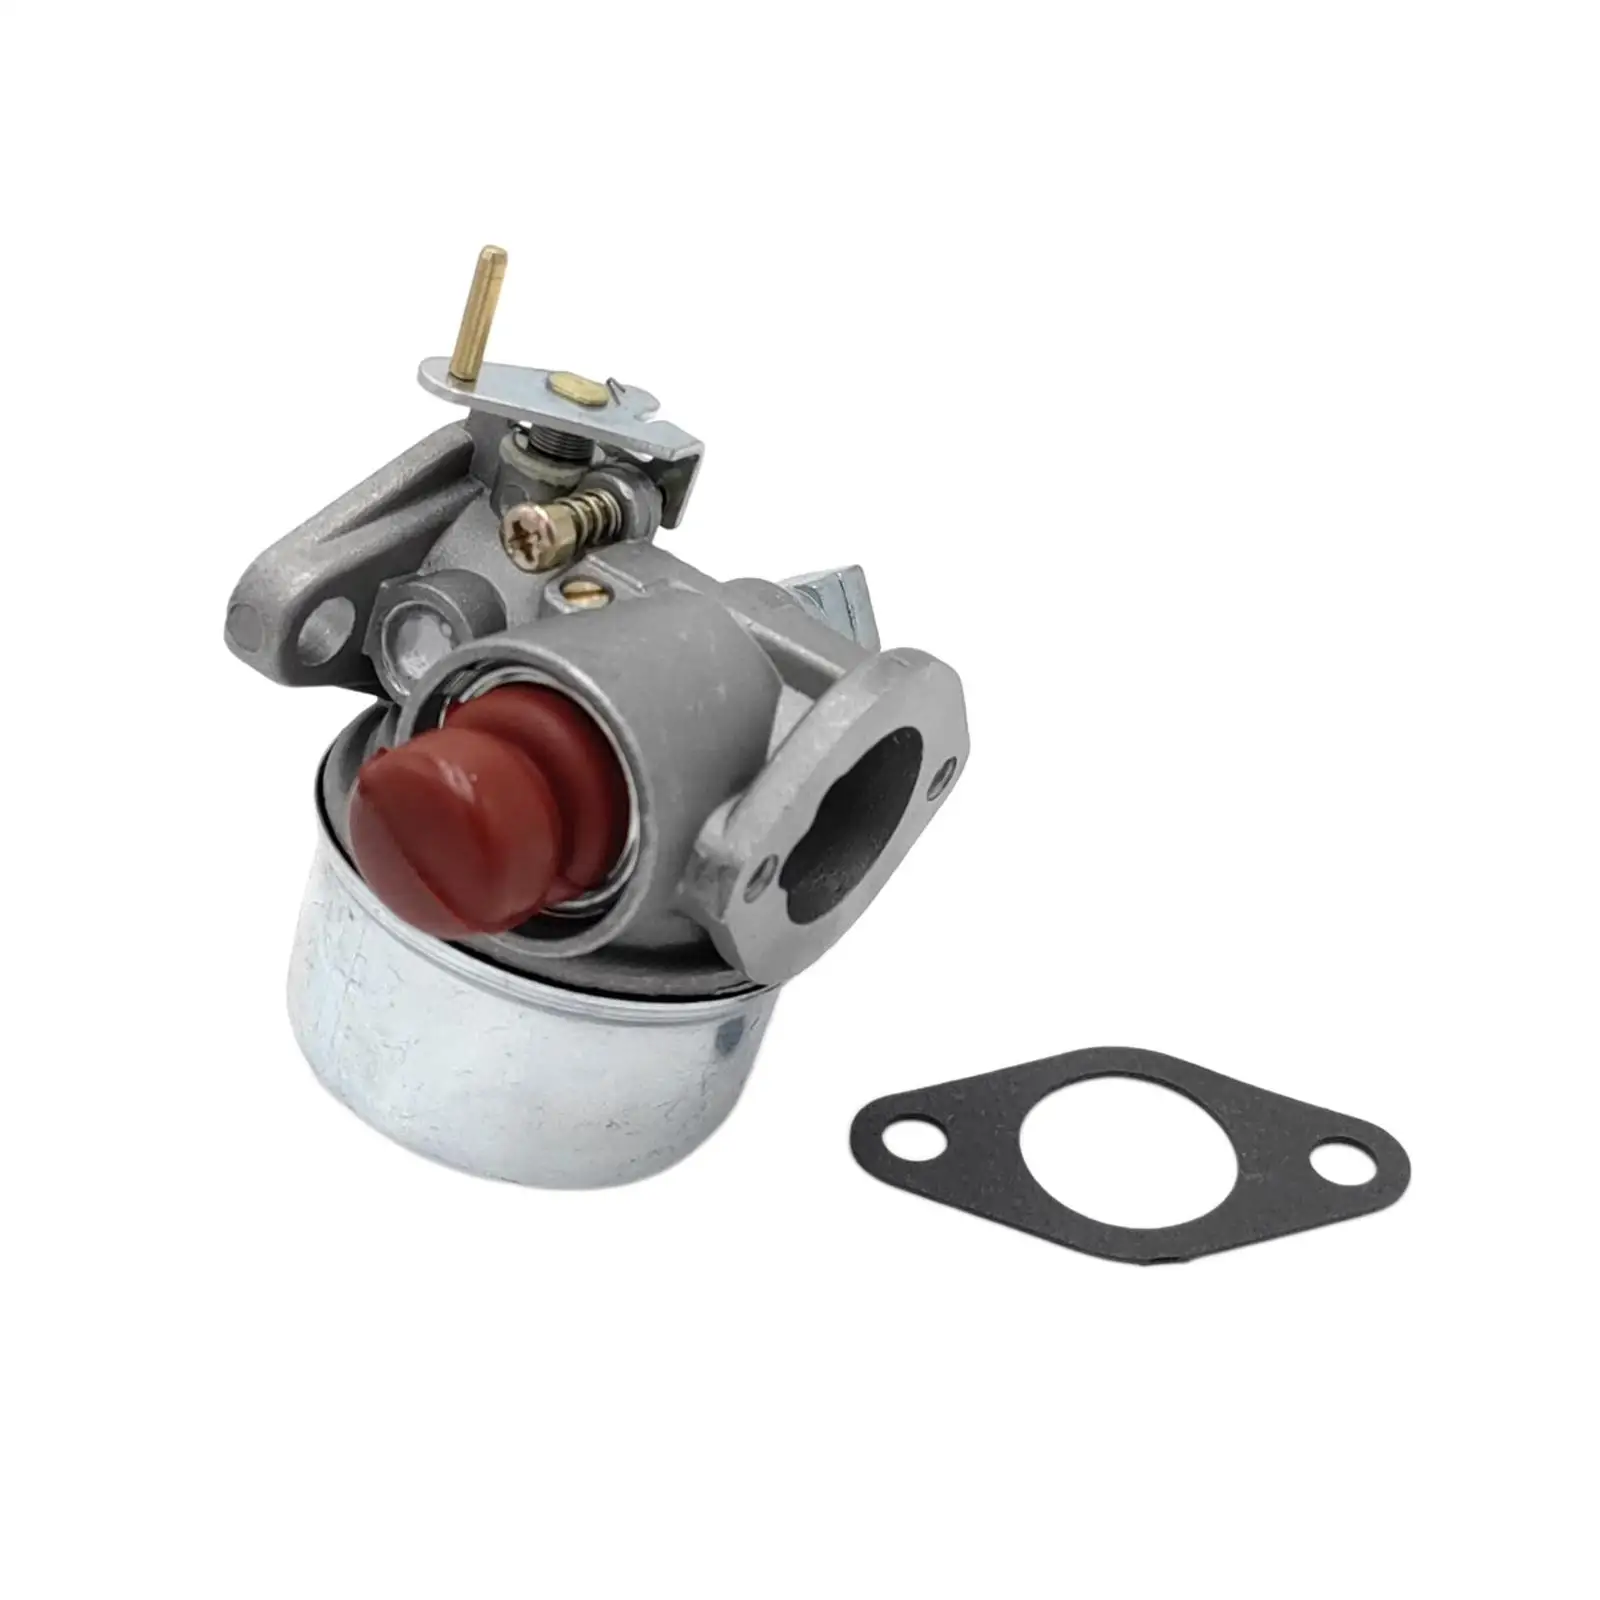 Carburetor with Gasket 2308.8010 Engine Lawn Mower Assembly Easy to Install for Horizontal Motore Tecumseh Geotec GEO35, GEO40